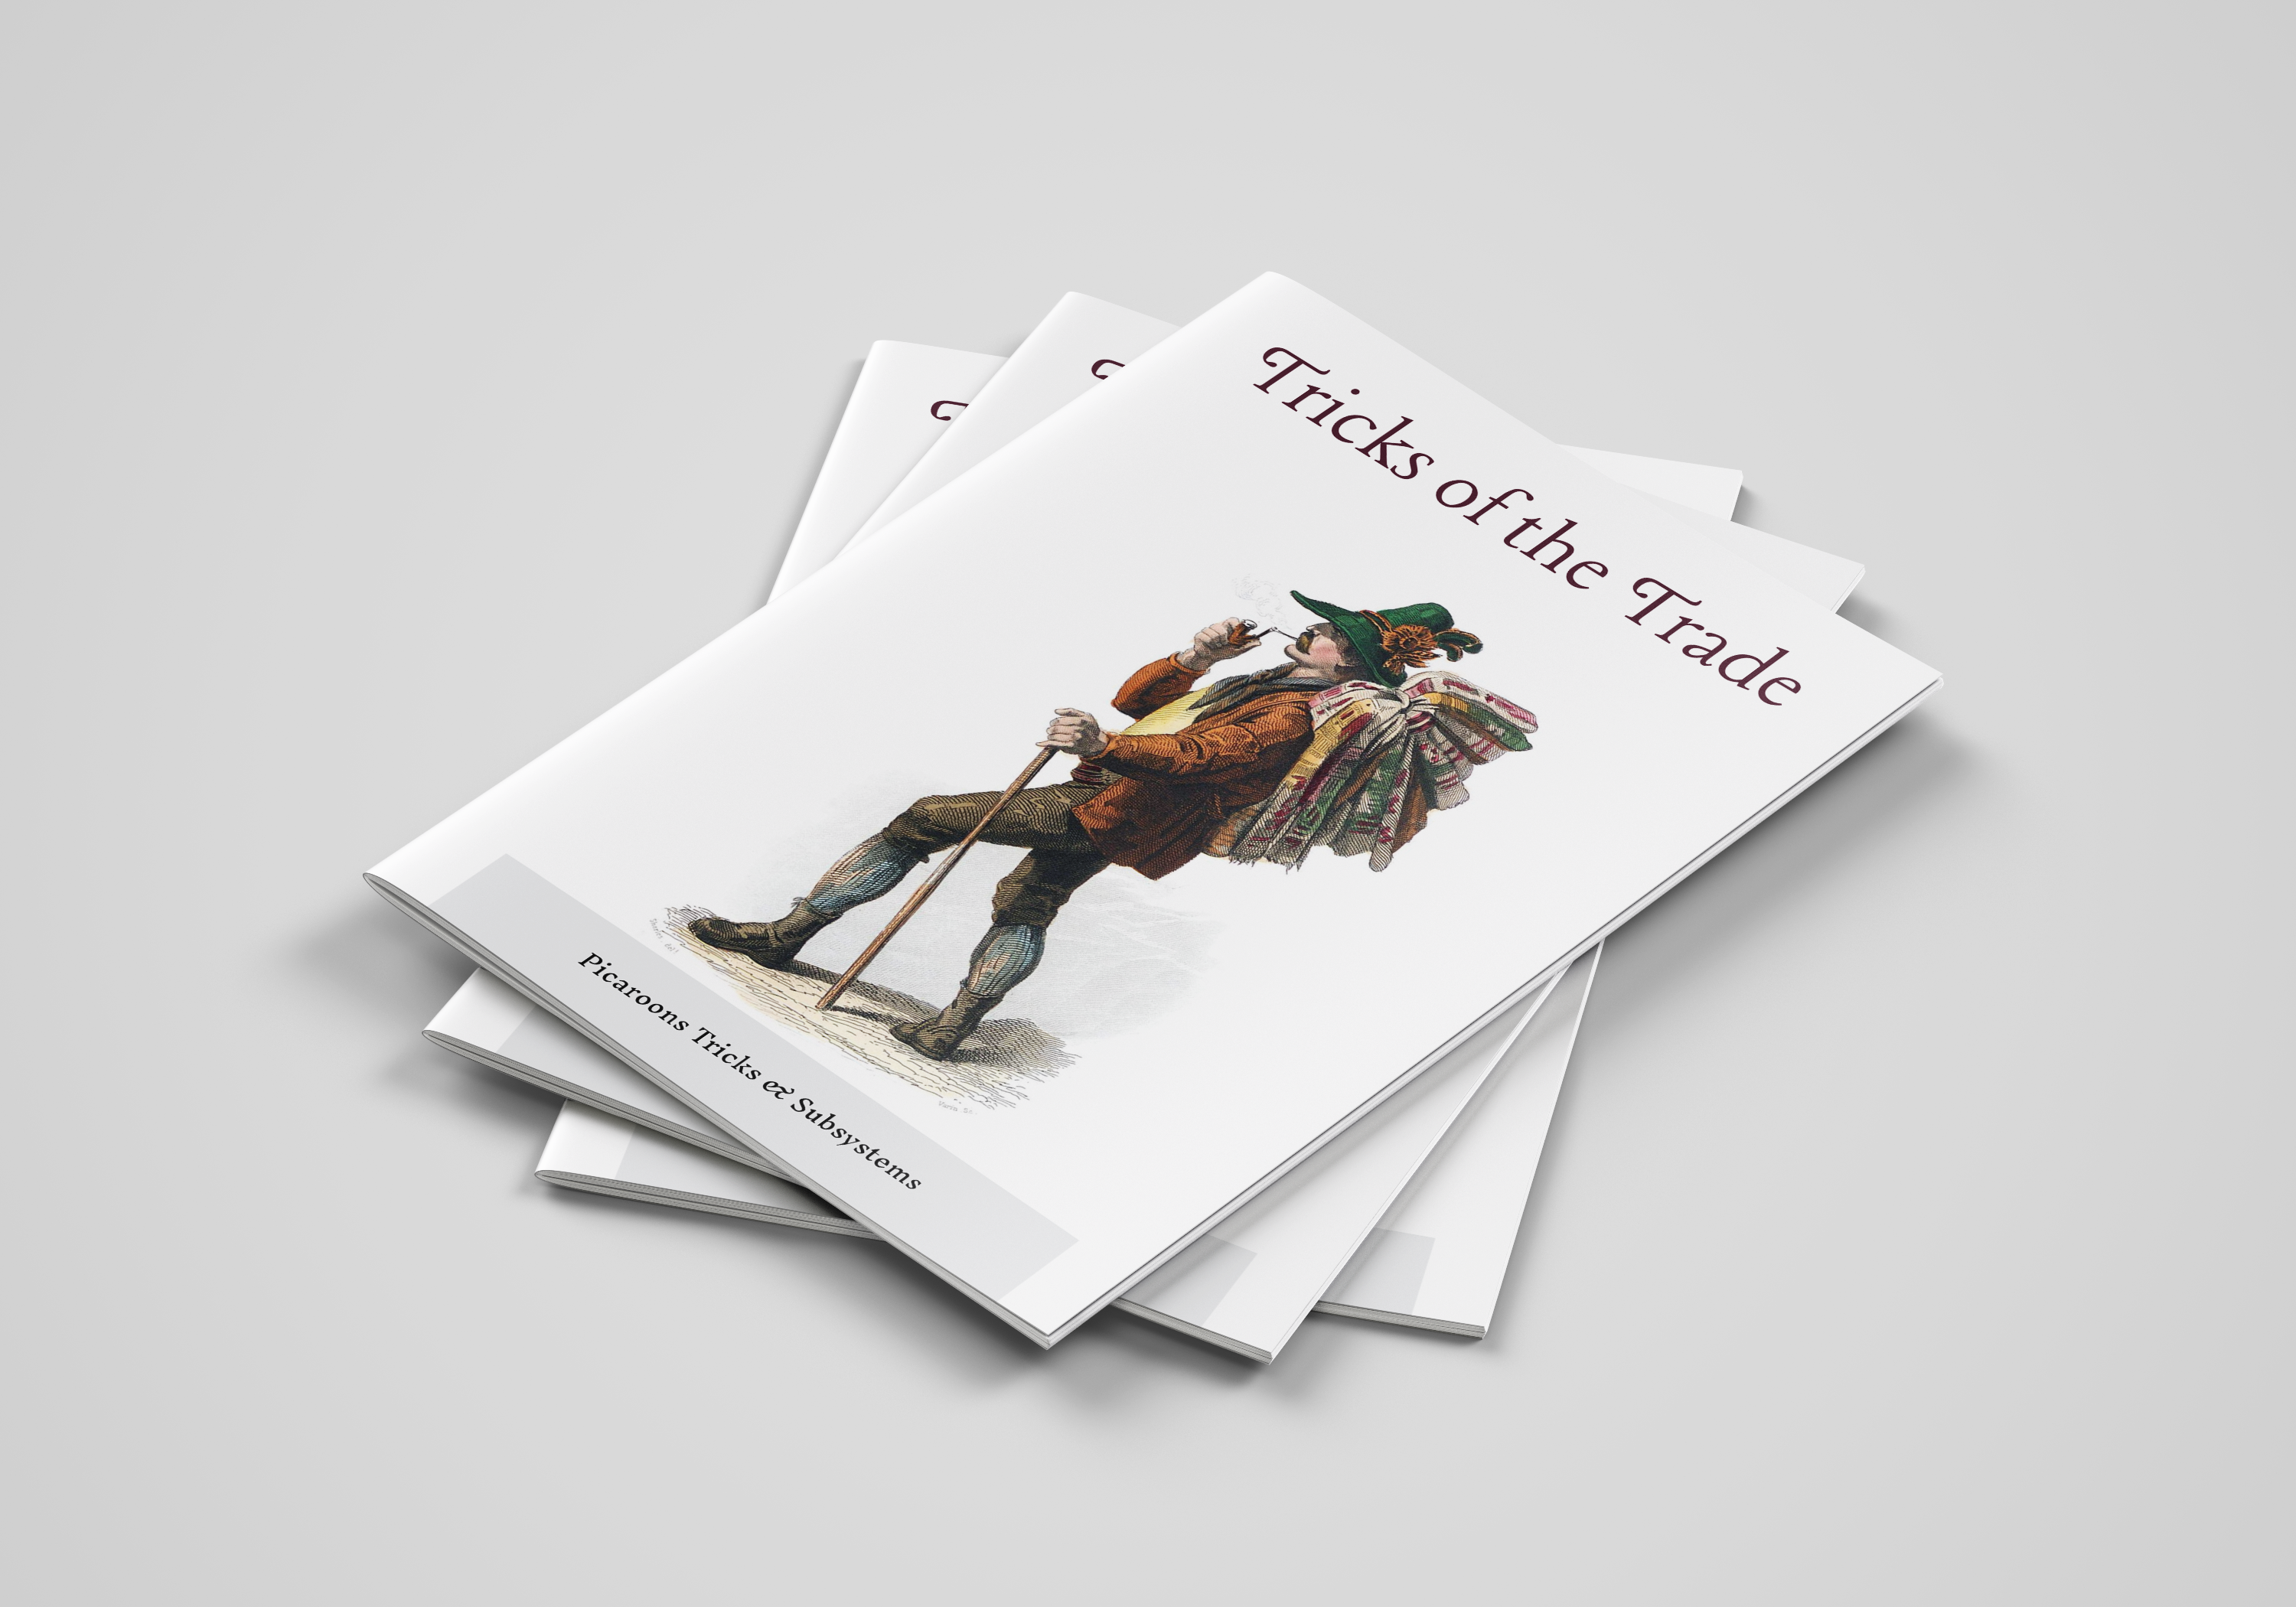 Mockup of the Tricks of the Trade zine, featuring a man in a green hat and rusty brown jacket carrying a walking stick and a bundle of carpets, smoking a pipe